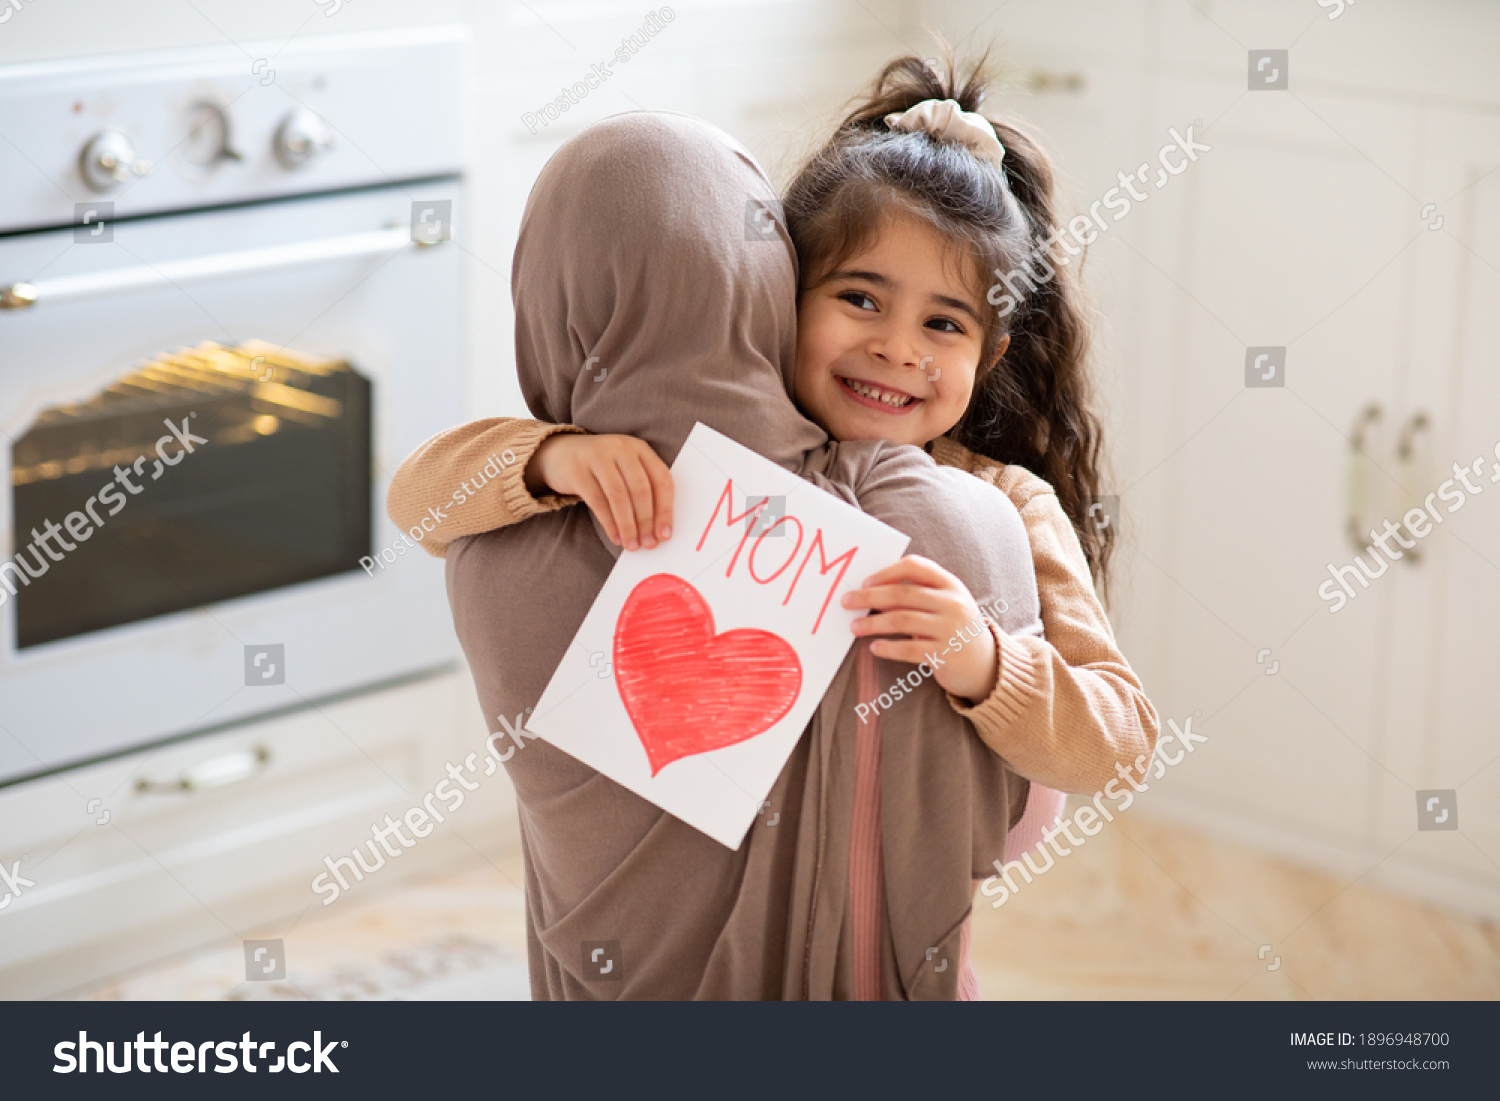 Smiling little girl holding greeting card for Happy Mother's Day with drawn red heart and hugging her muslim mom. Loving islamic family bonding together at home, closeup shot with free space #1896948700